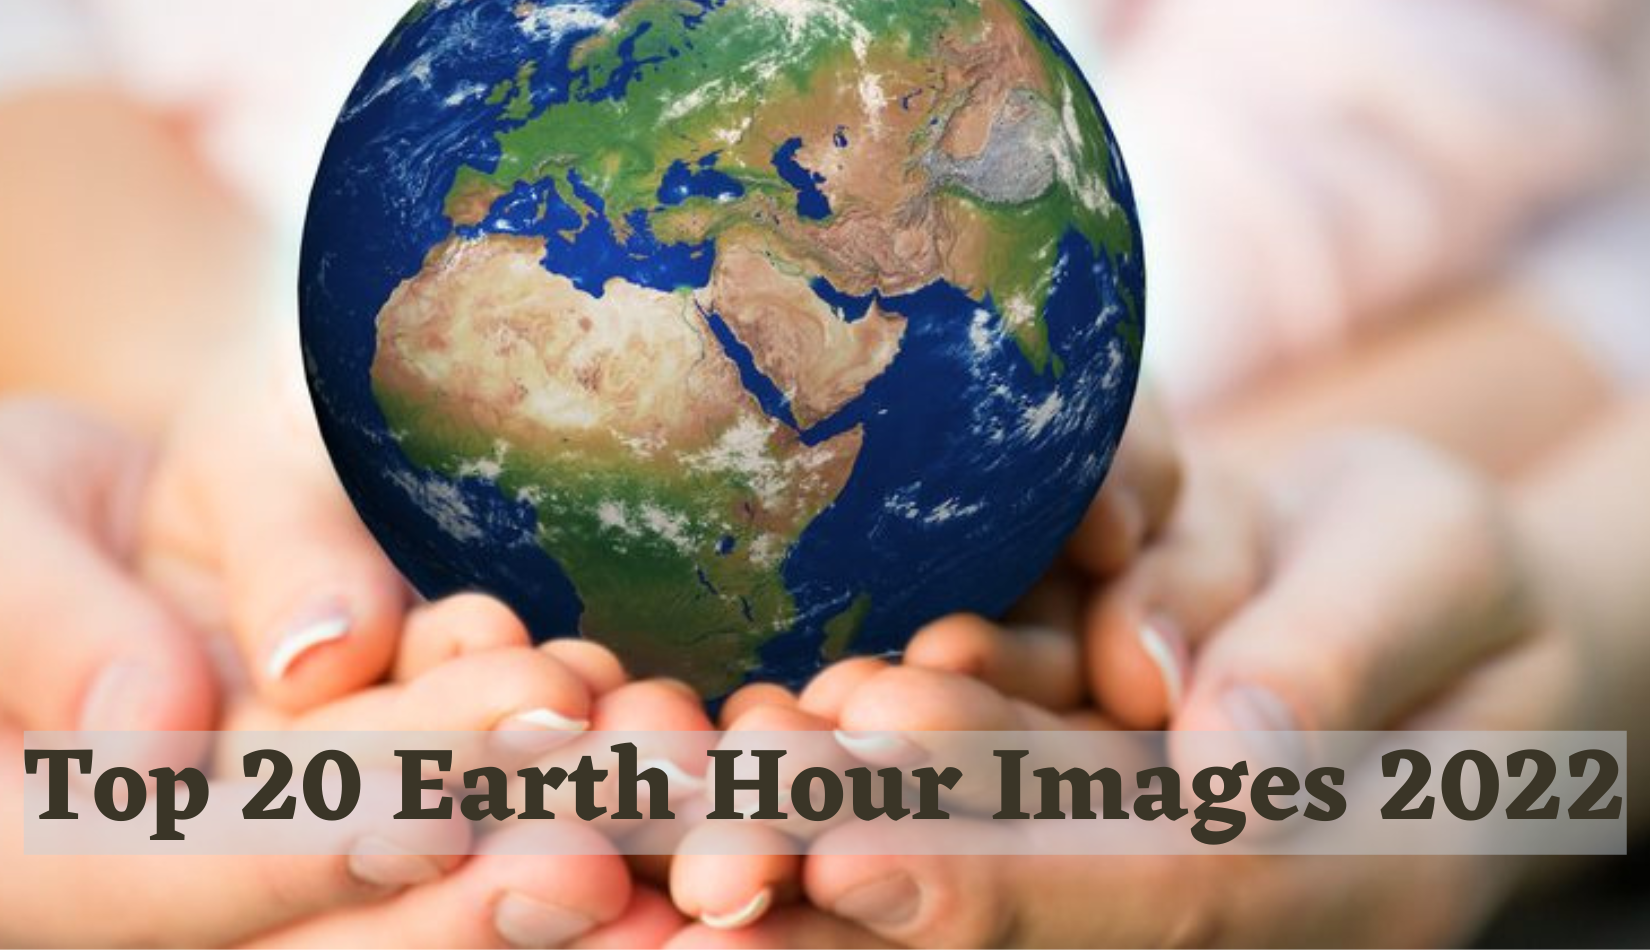 Earth Hour Images 2022